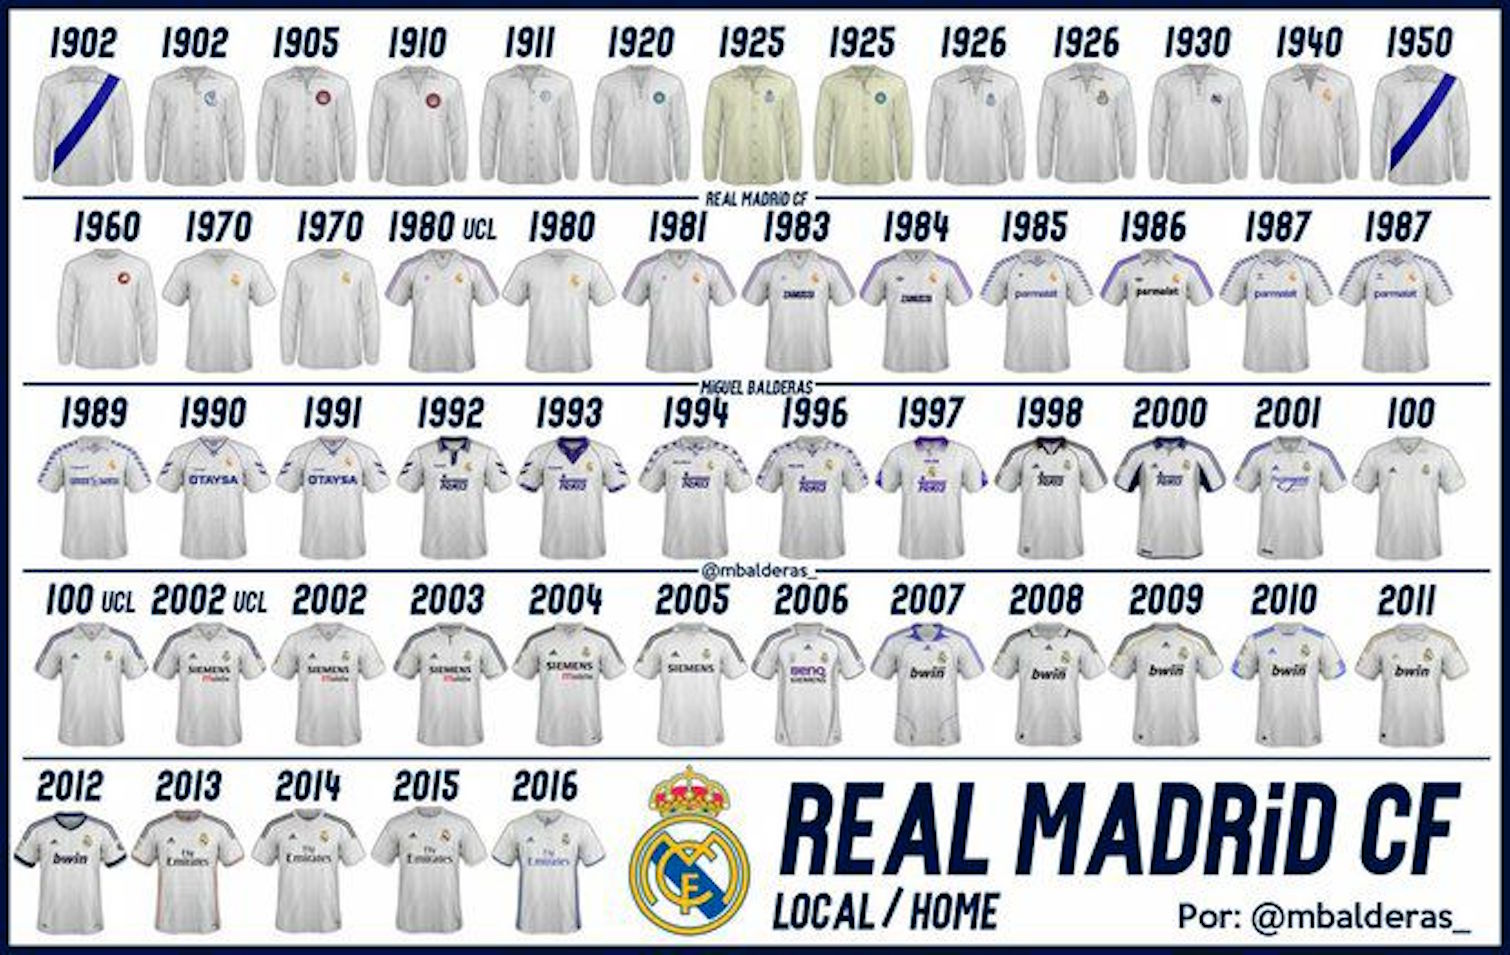 real madrid jerseys over the years